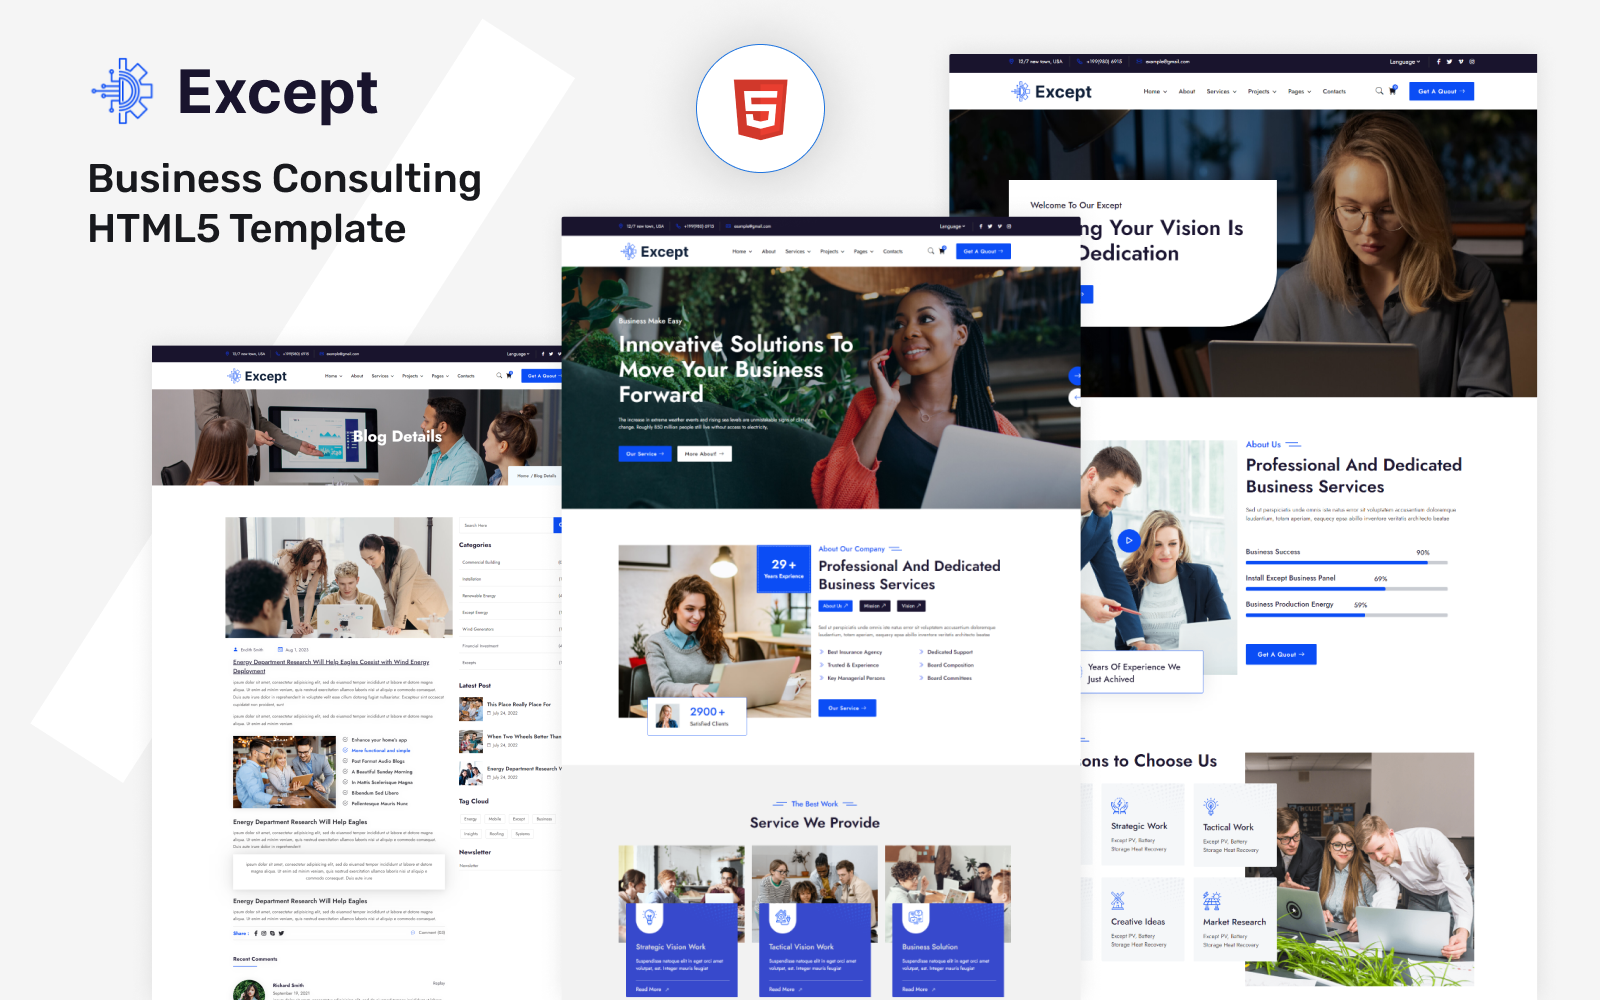 Except-Business Consulting HTML5 Template